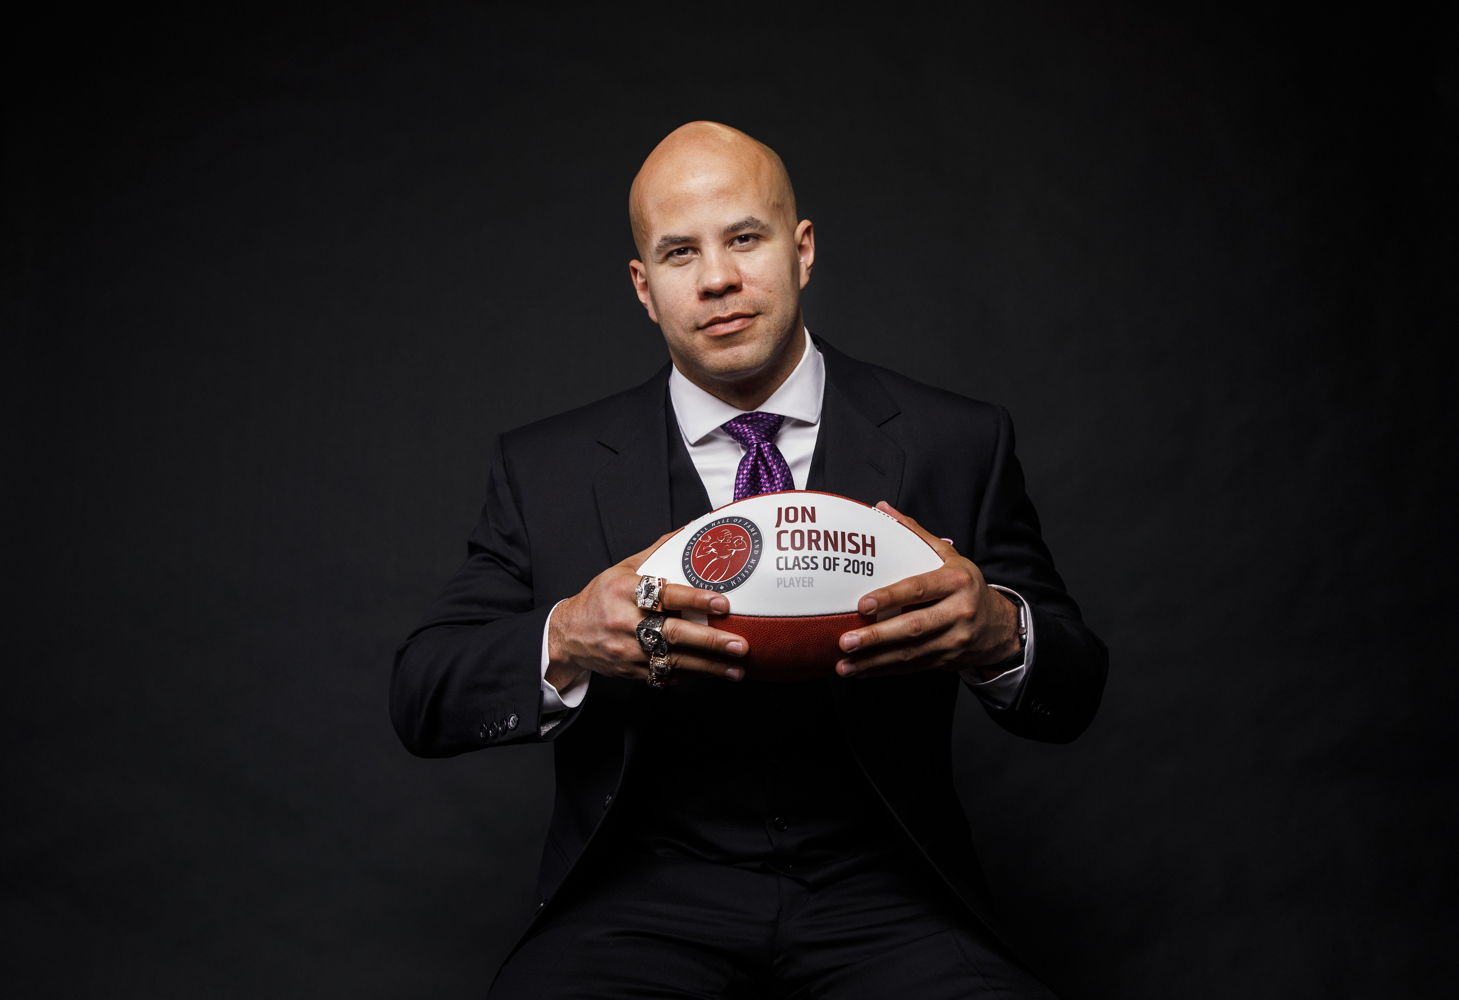 Jon Cornish, Canadian Football Hall of Fame Class of 2019 Inductee. Photo credit: CFL.ca/Kevin Sousa